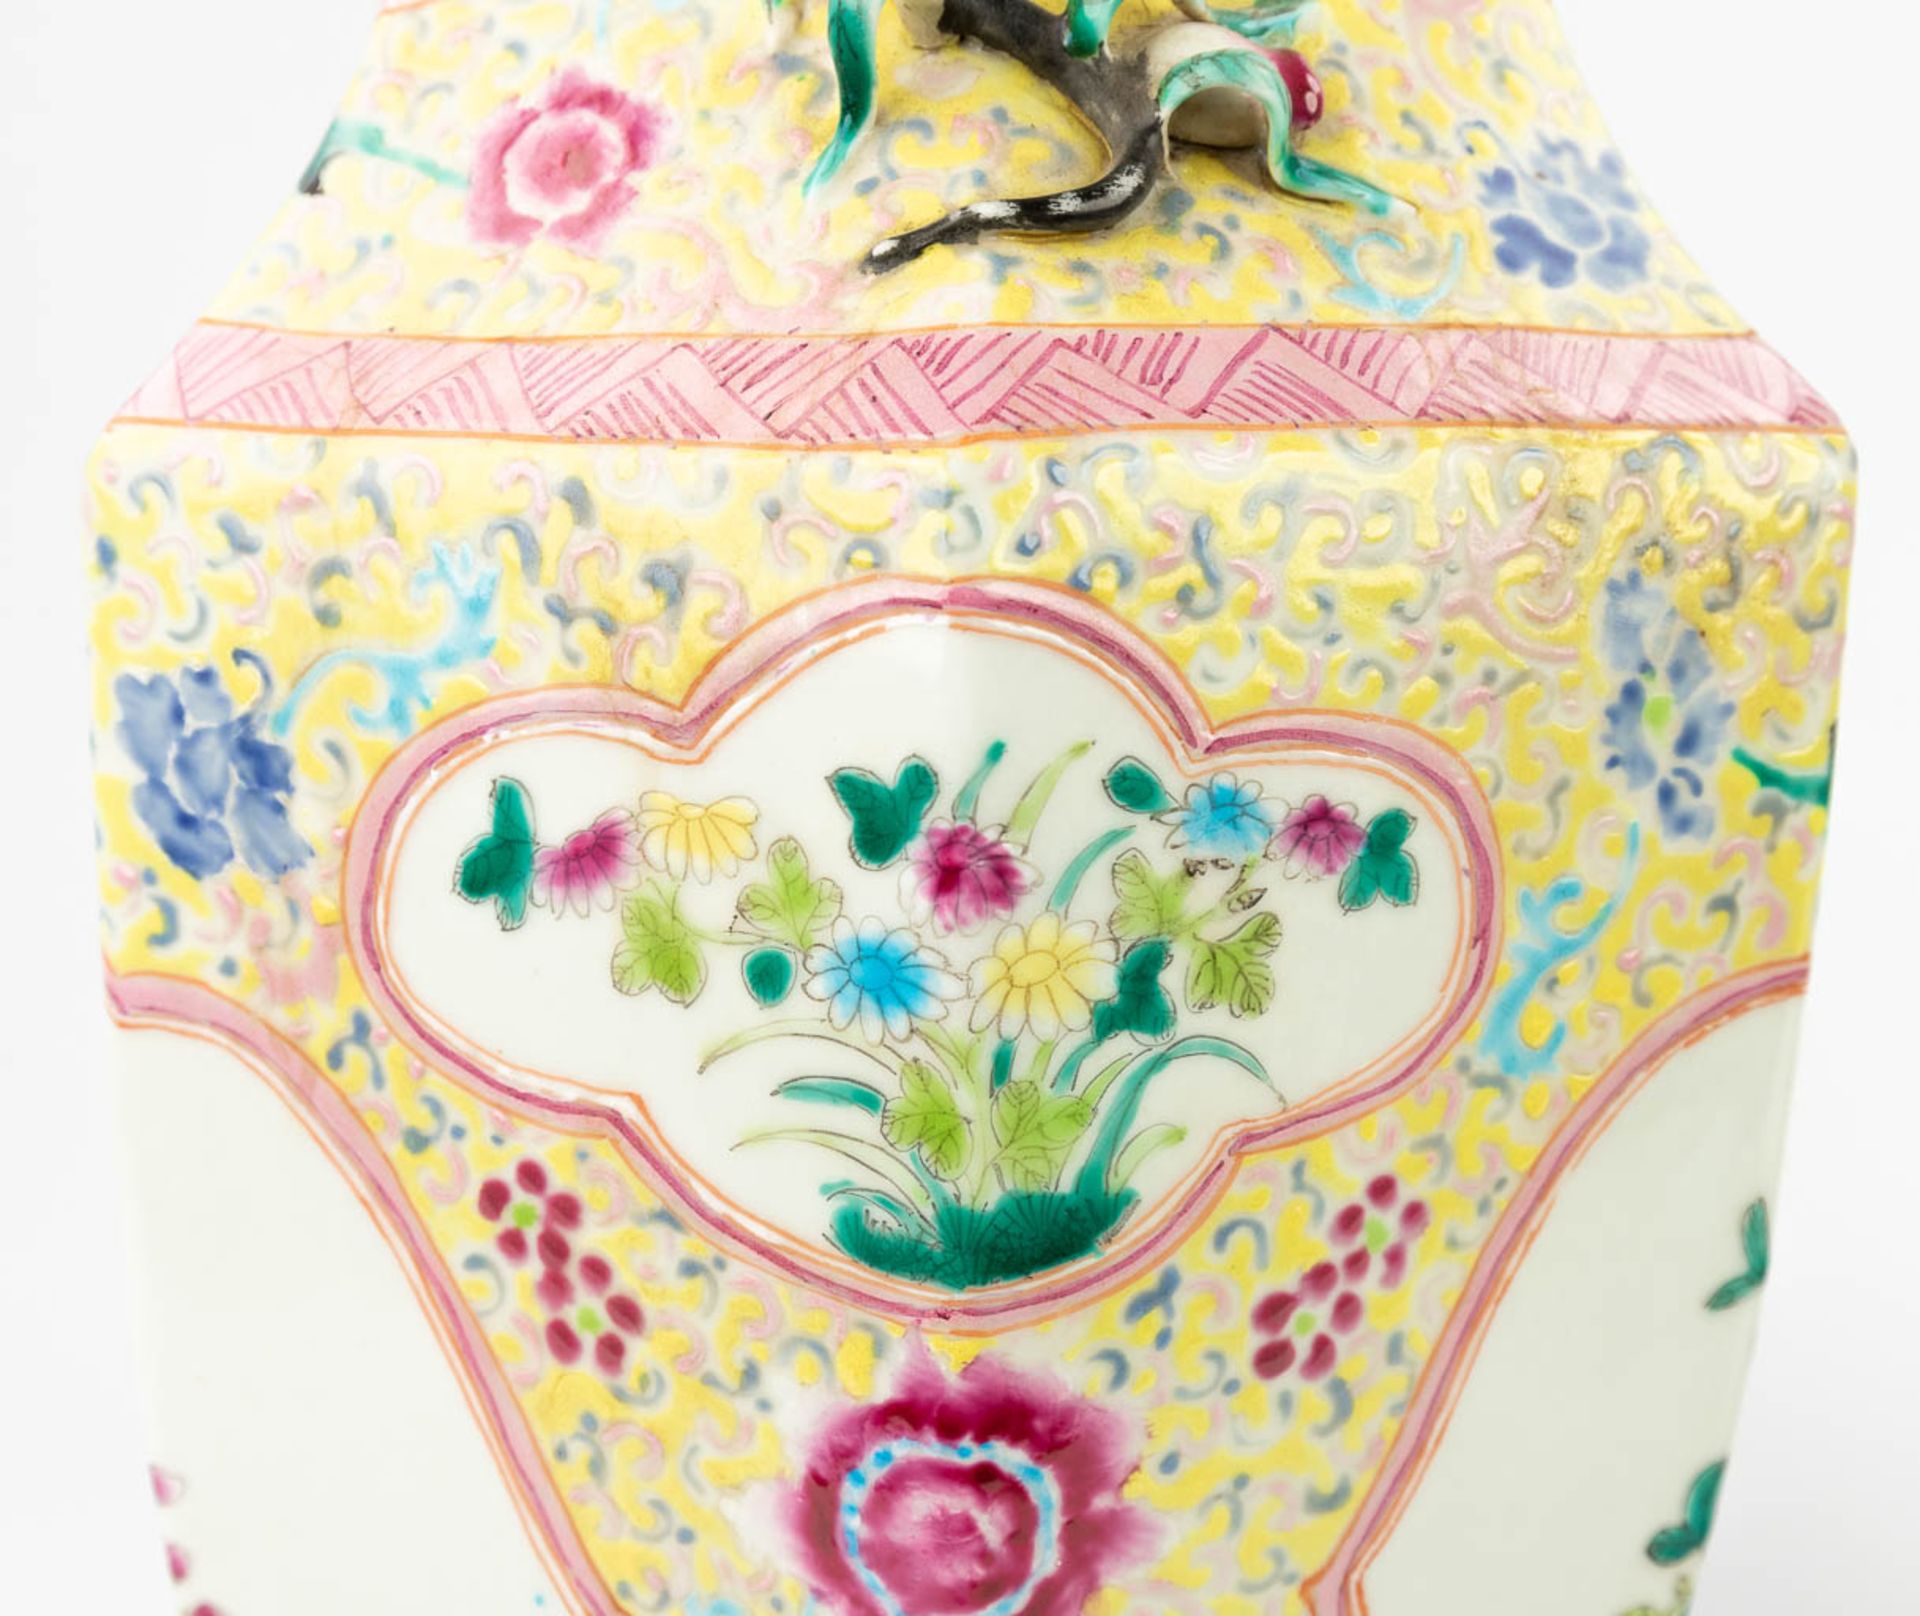 A pair of hexagonal Chinese vases made of porcelain (18 x 22 x 46 cm) - Image 17 of 17